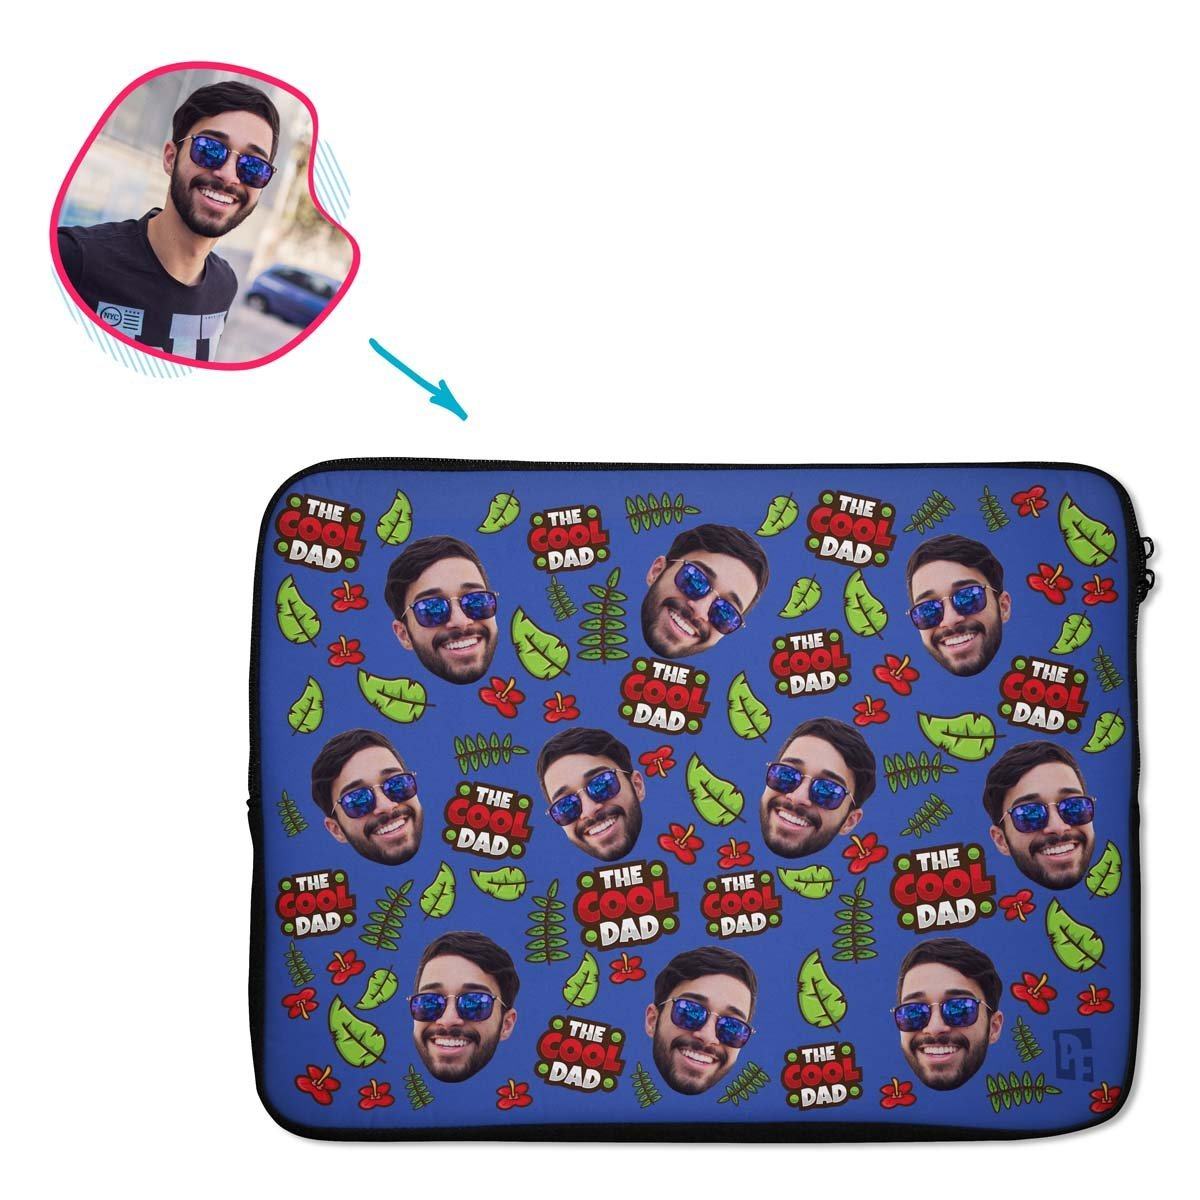 darkblue The Cool Dad laptop sleeve personalized with photo of face printed on them